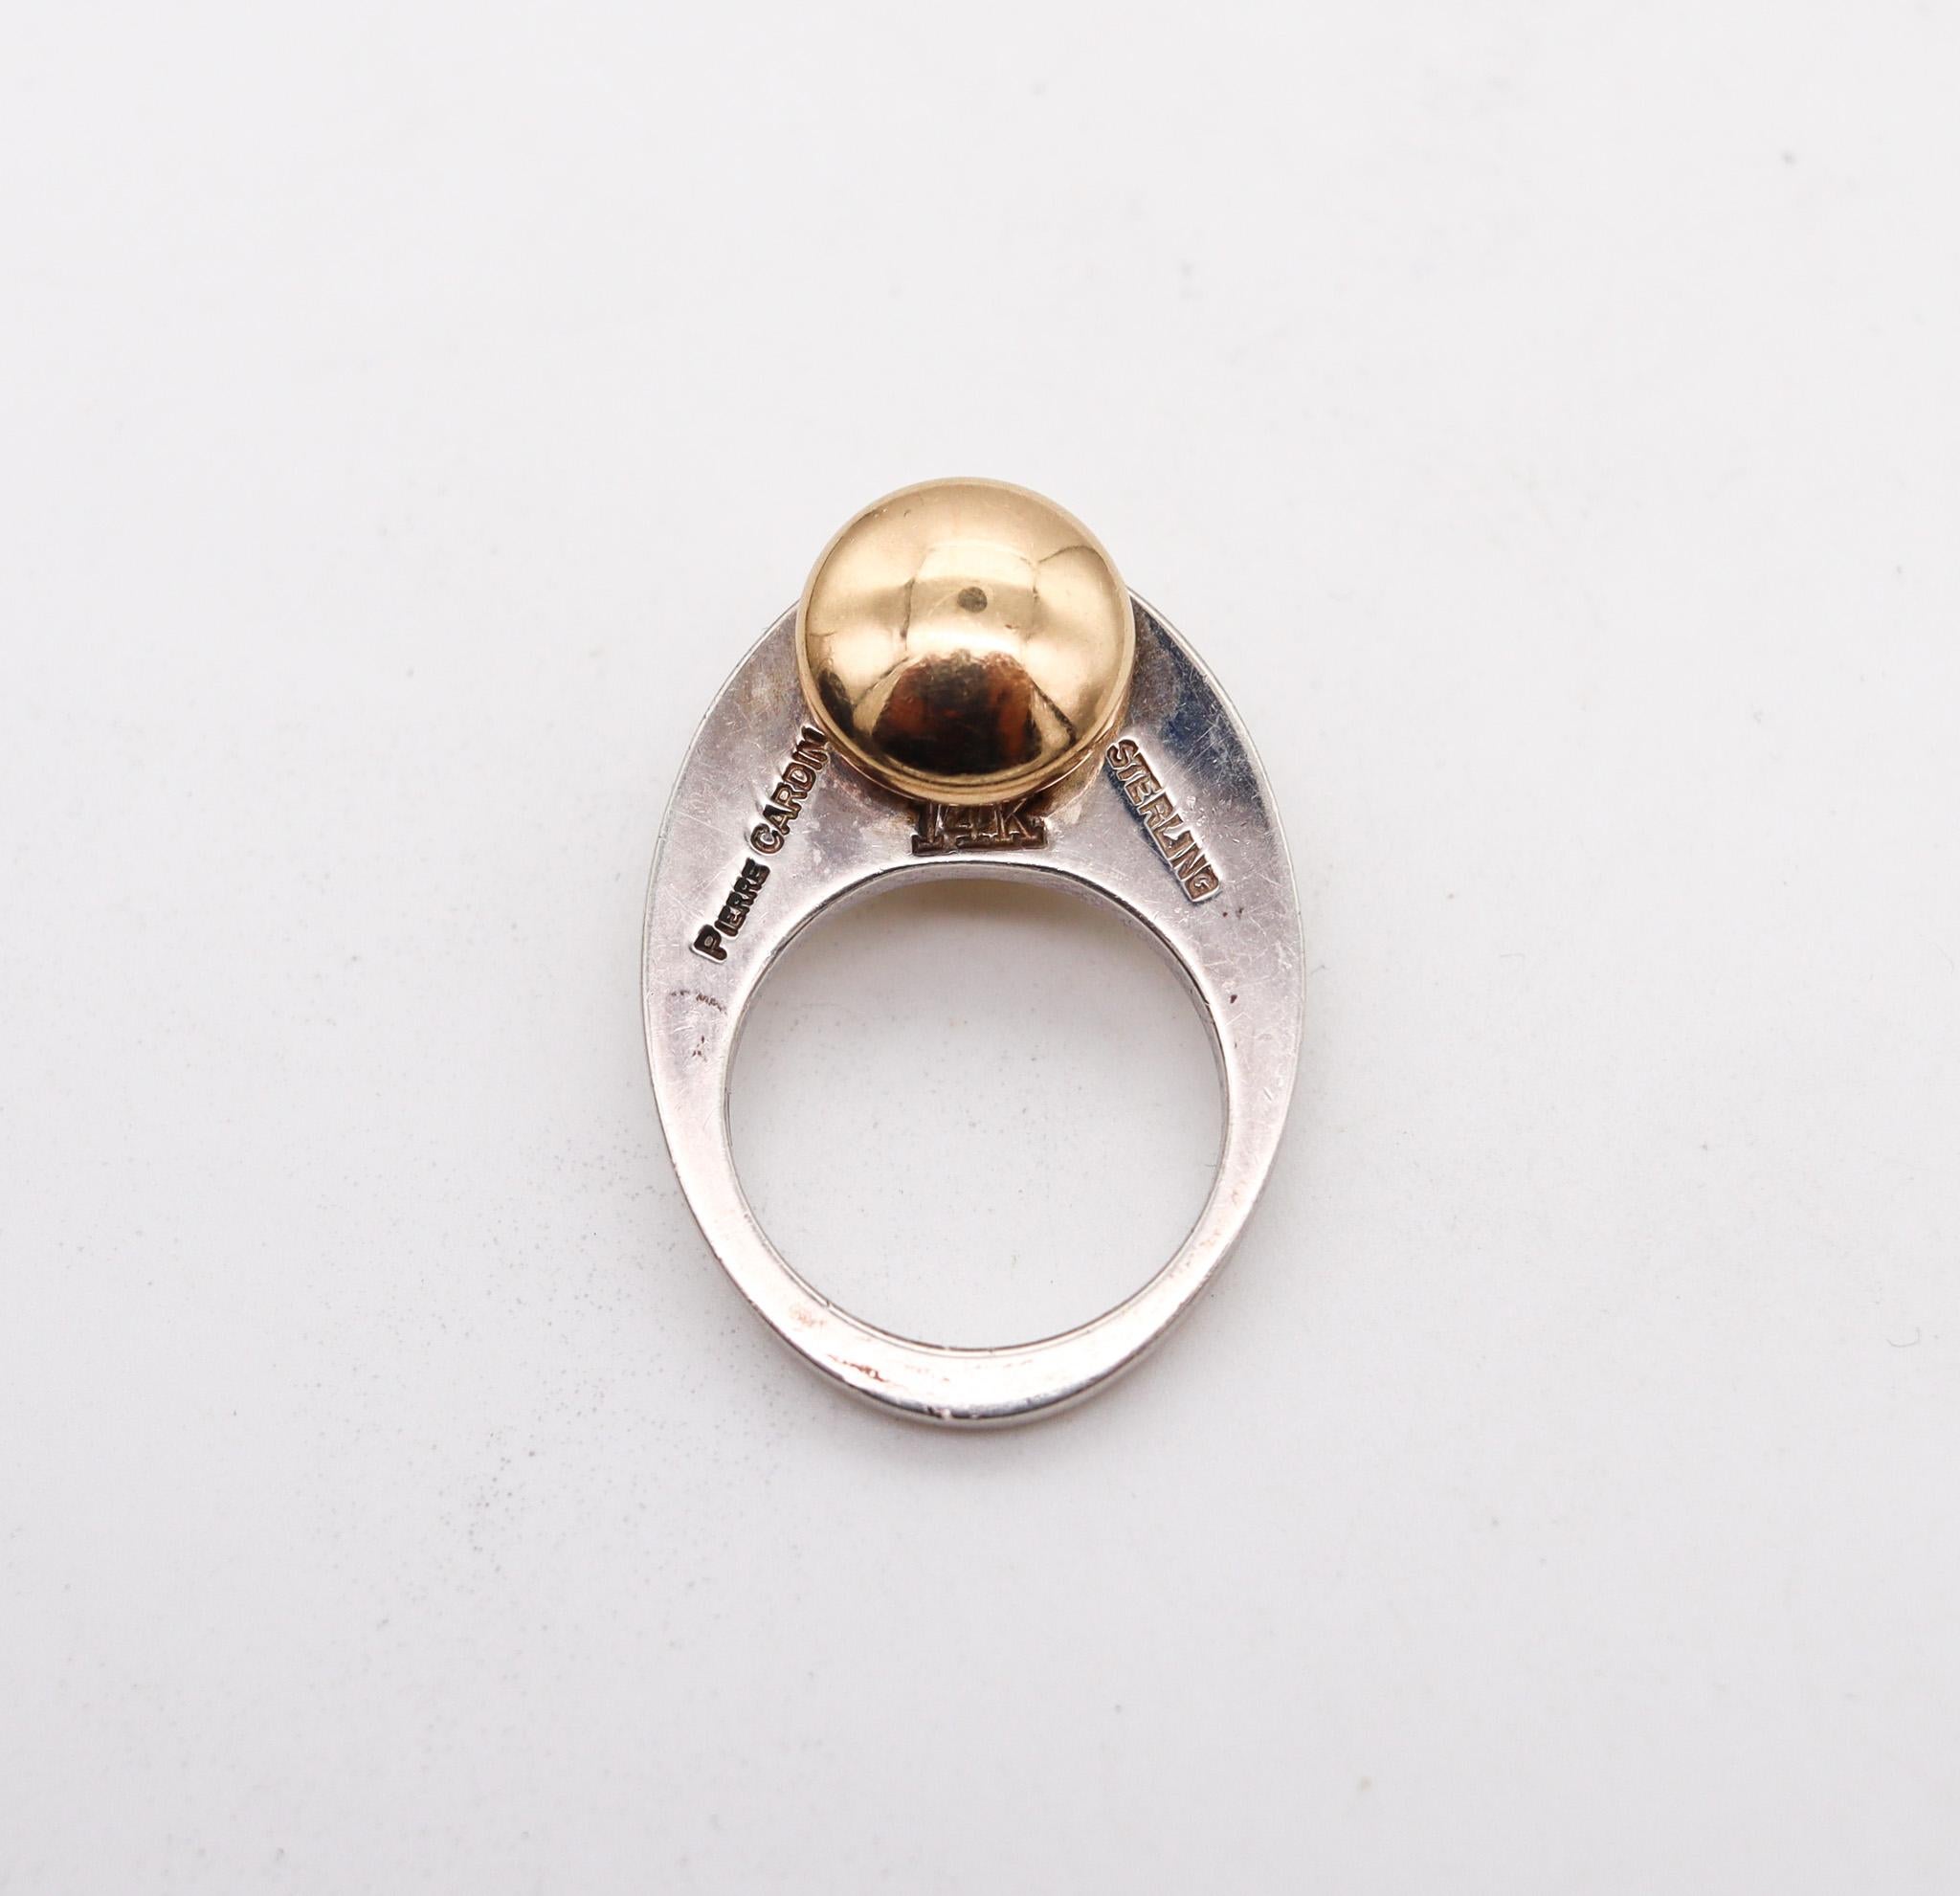 Pierre Cardin 1970 Paris Geometric Sculptural Ring in 14kt Gold and Sterling In Excellent Condition For Sale In Miami, FL